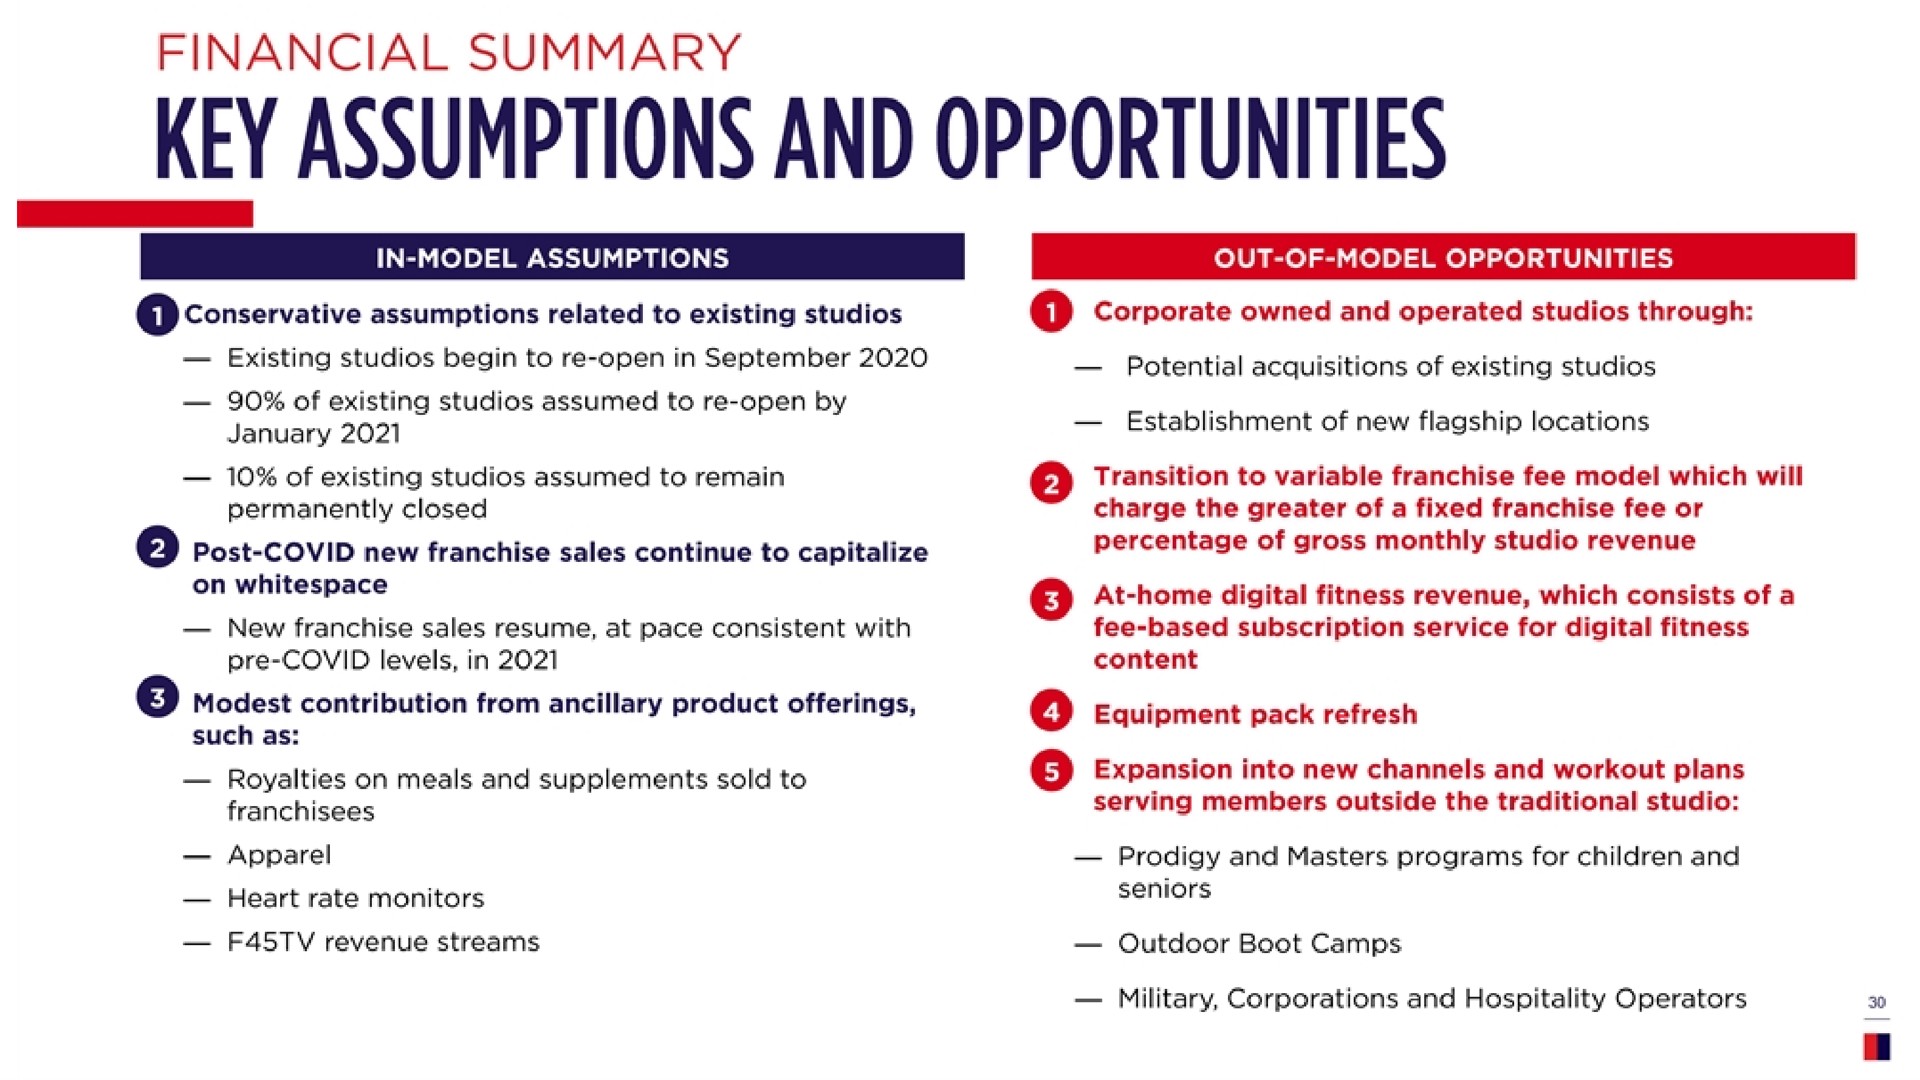 key assumptions and opportunities | F45